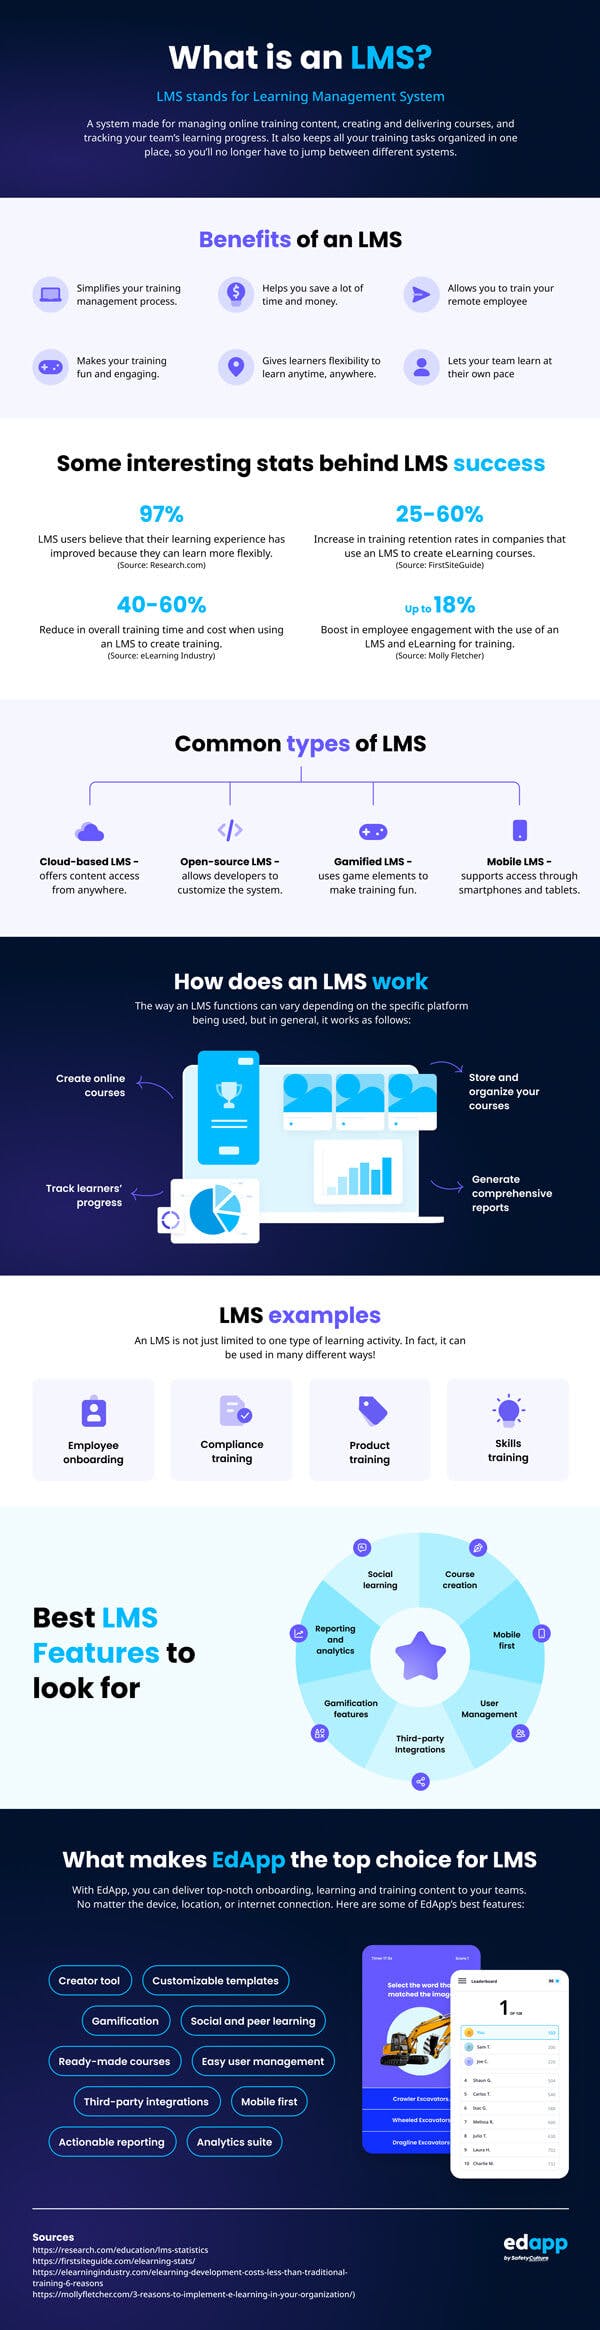 What is an LMS - Learning Management System - Infographic